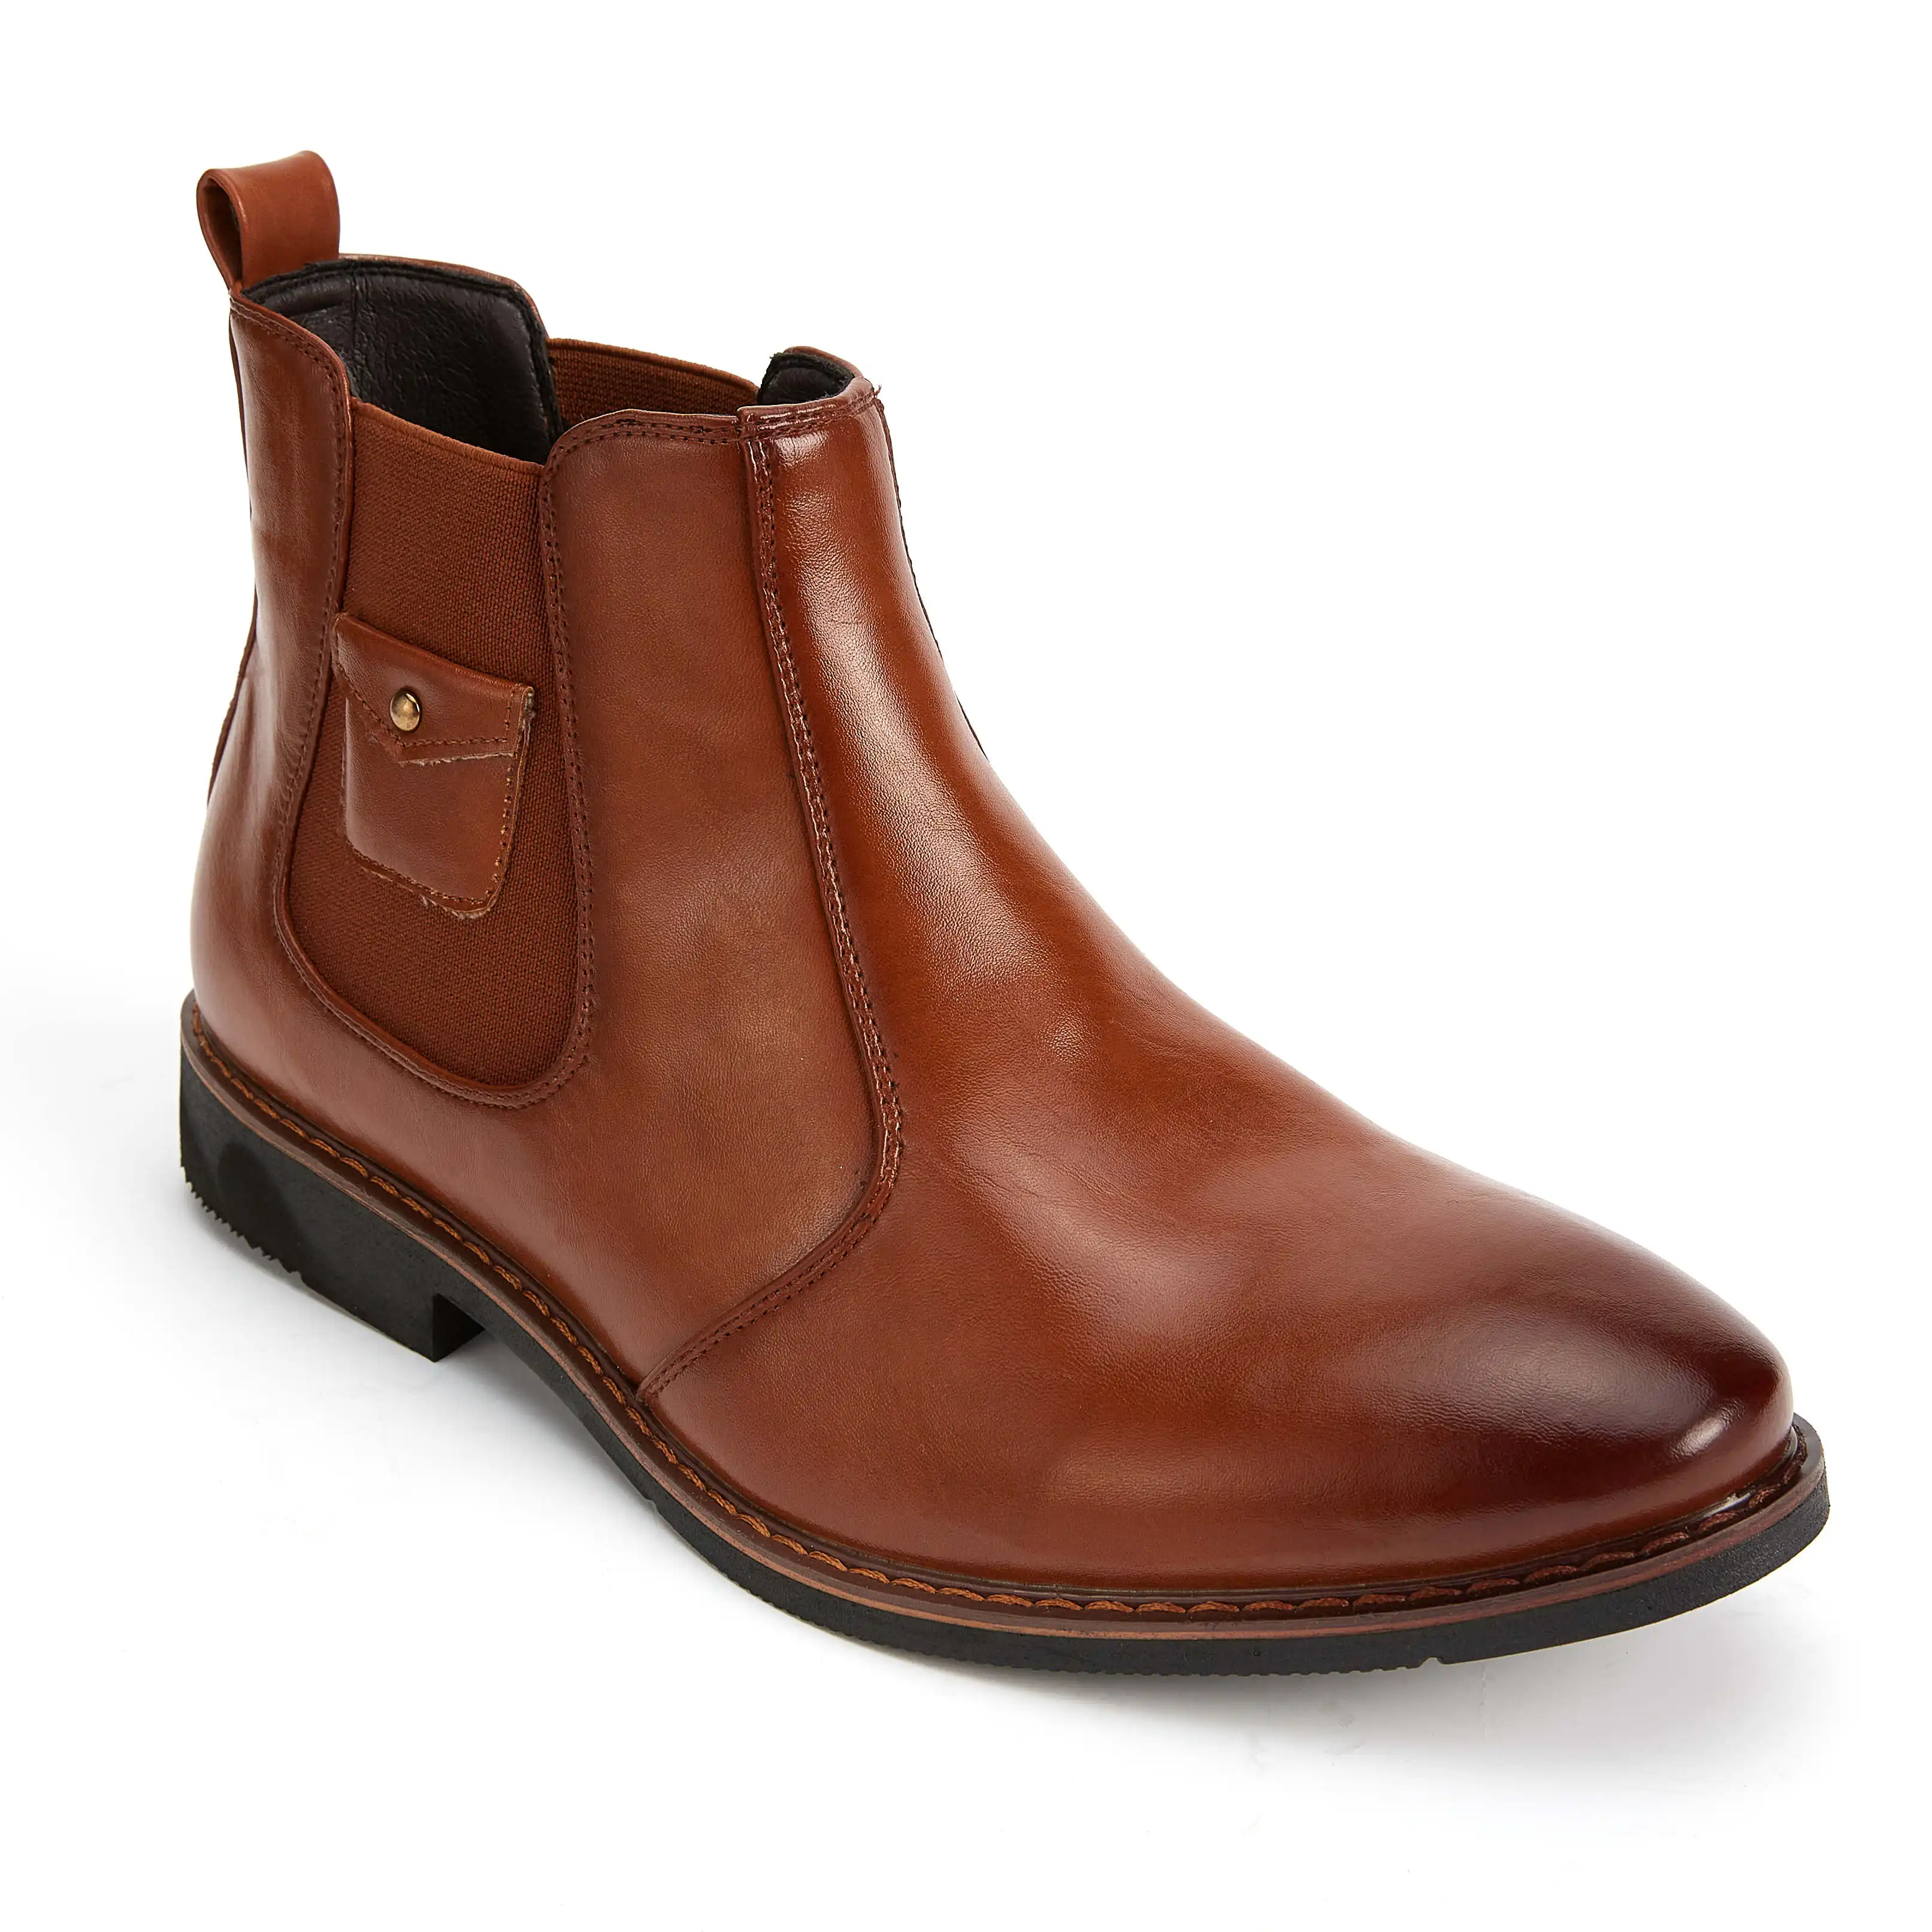 Fashion Chelsea Short Boots Men's high top leather boots with zipper men's shoes are directly supplied from the origin